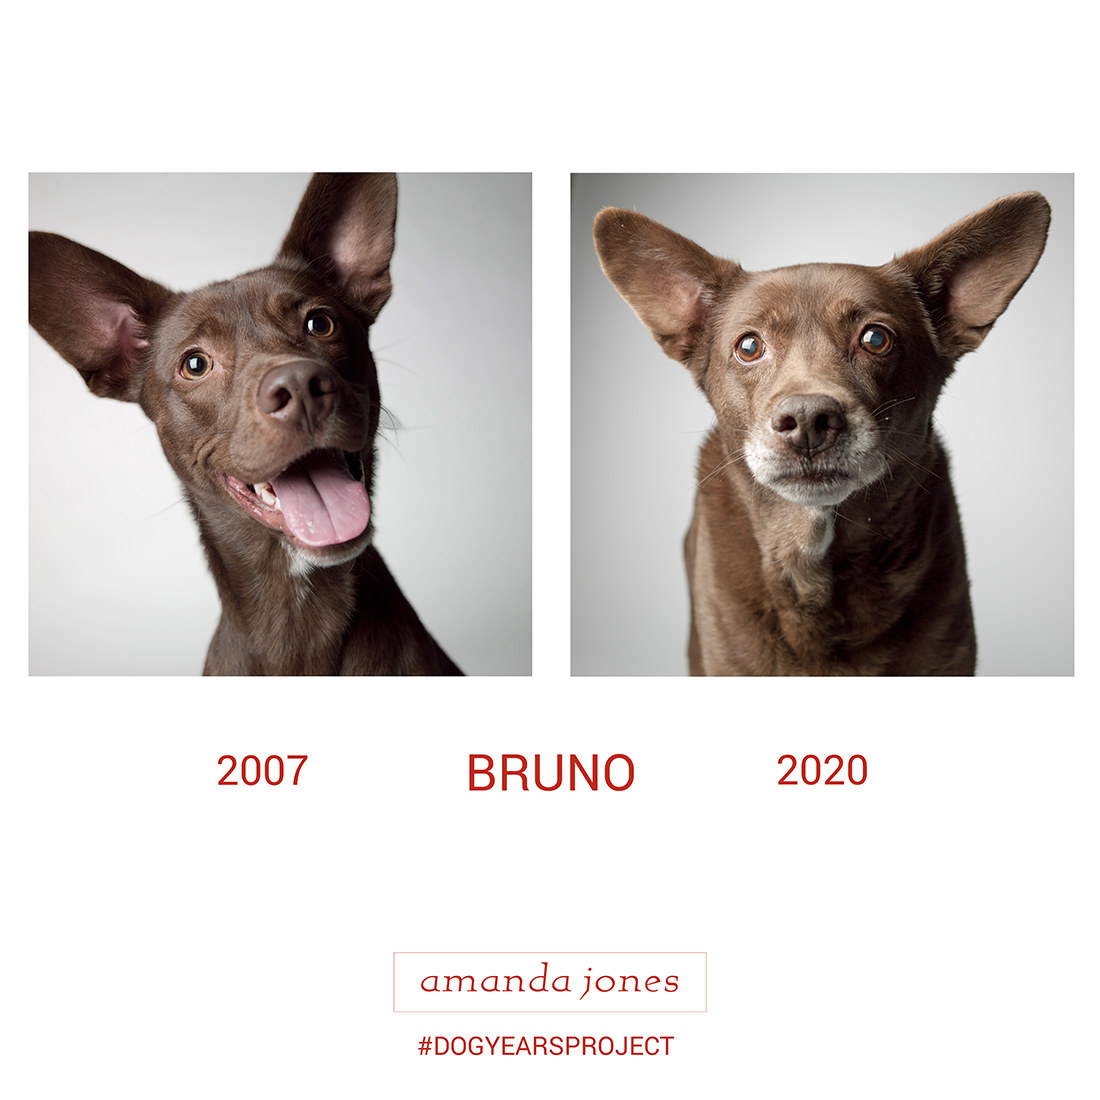 image of one dog taken years apart, from when they were younger to older